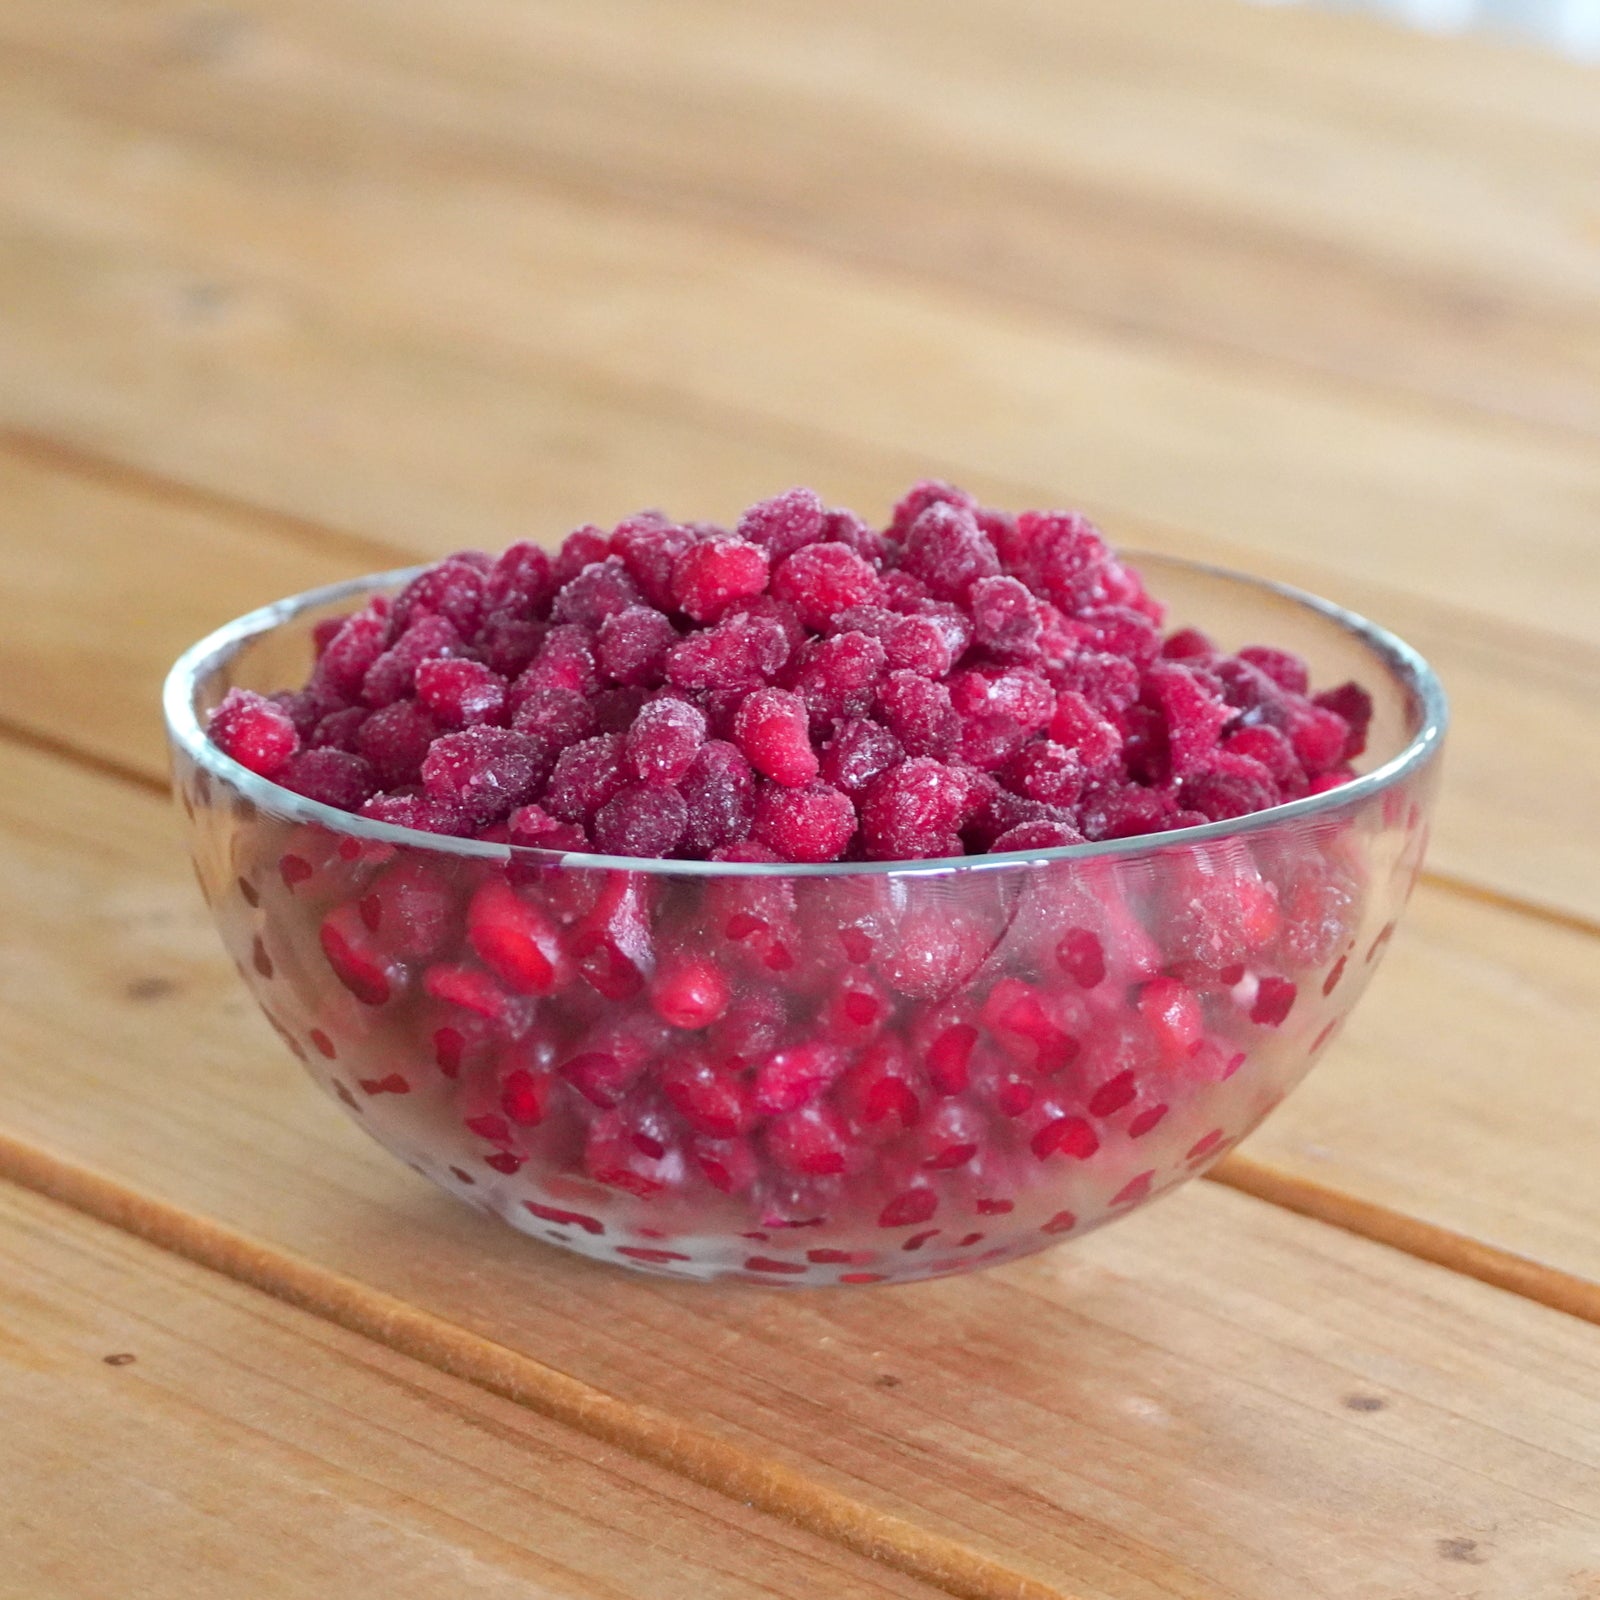 All-Natural Frozen Pomegranate Seeds from Turkey (1kg) - Horizon Farms